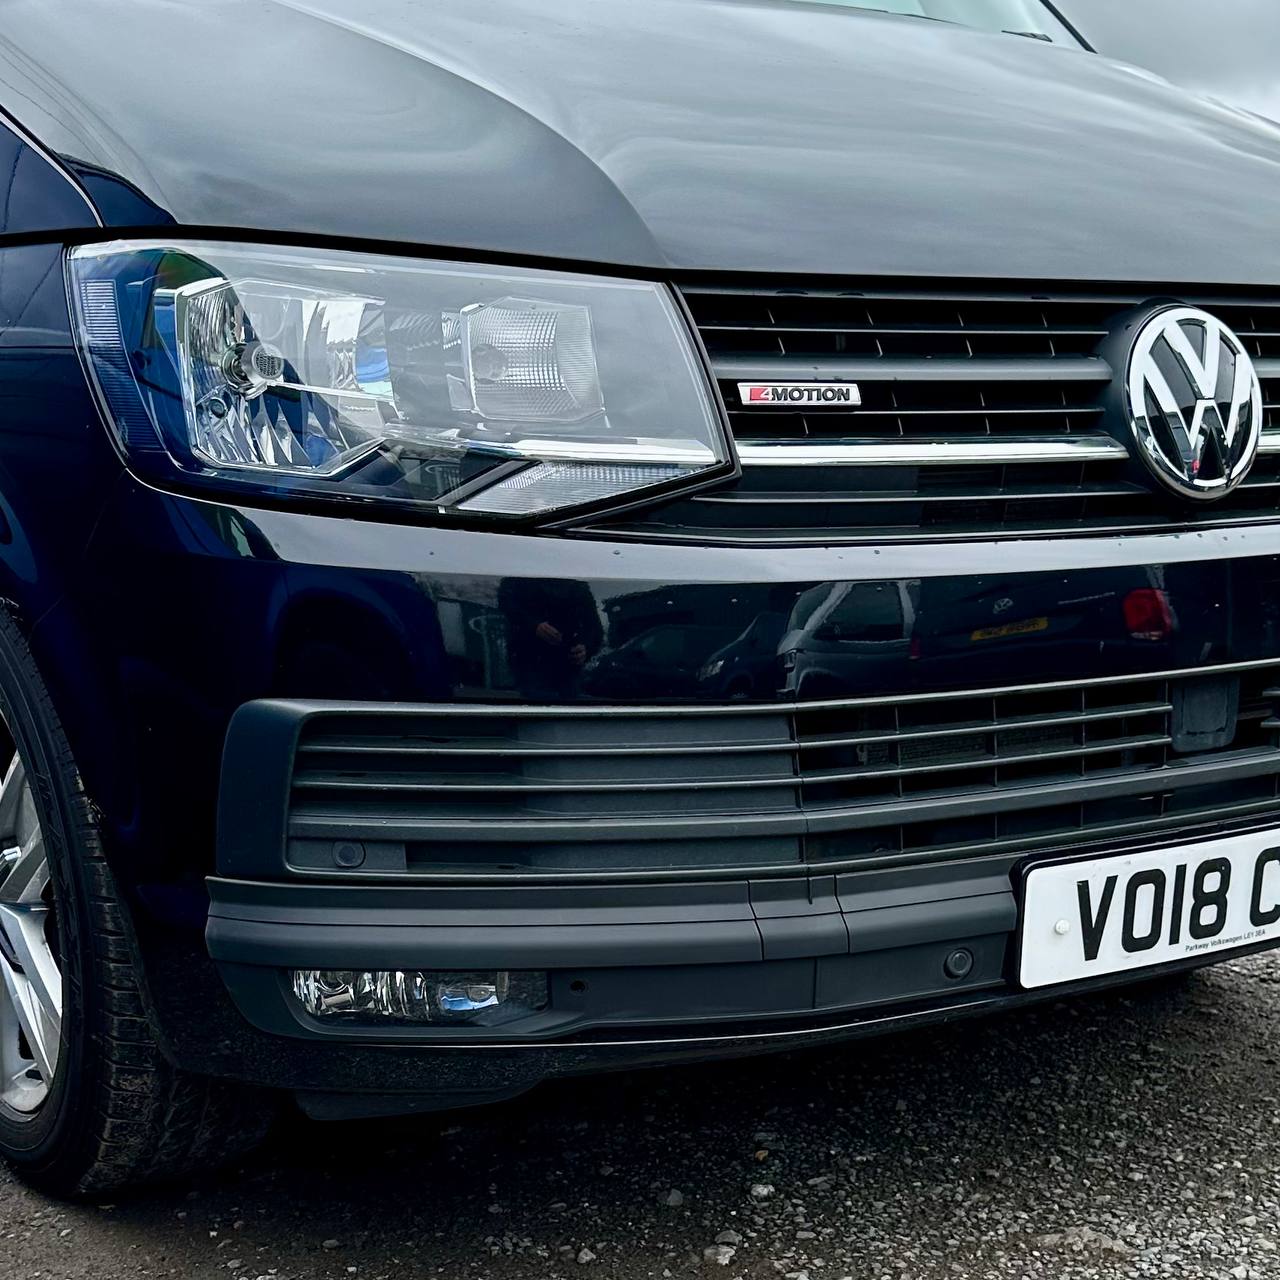 For VW T6 Highline Bumper only, California Beach and Ocean models, Caravelle, VanX Bumper Grille XL - Textured Finish